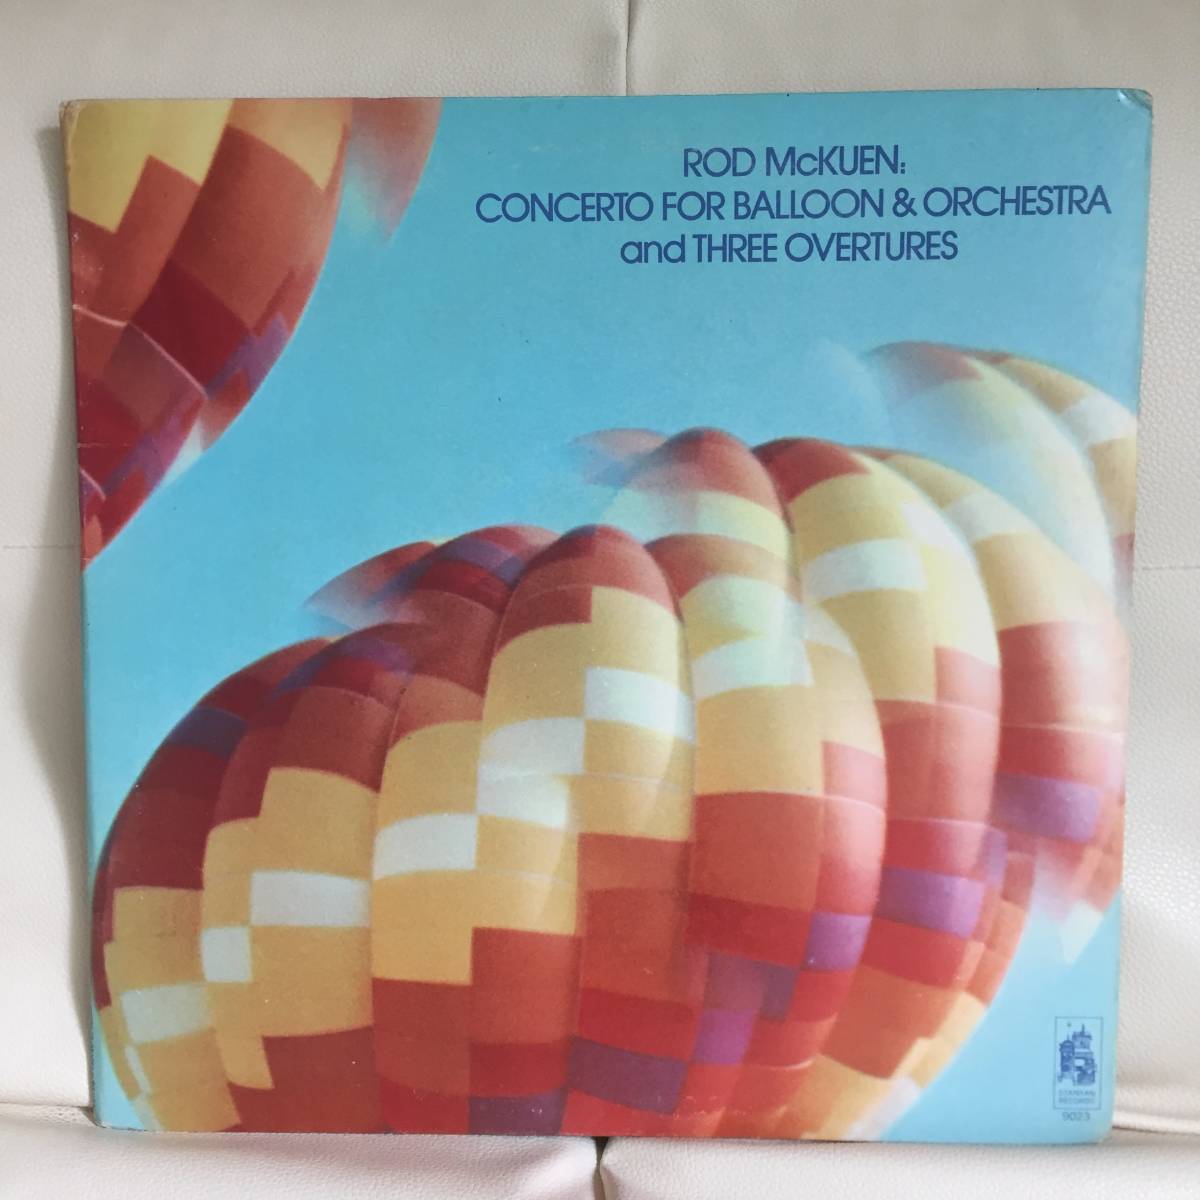 *[LP]ROD McKUEN / CONCERTO FOR BALLOON&ORCHESTRA and THREE OVERTURES (SR-9023) ( foreign record )